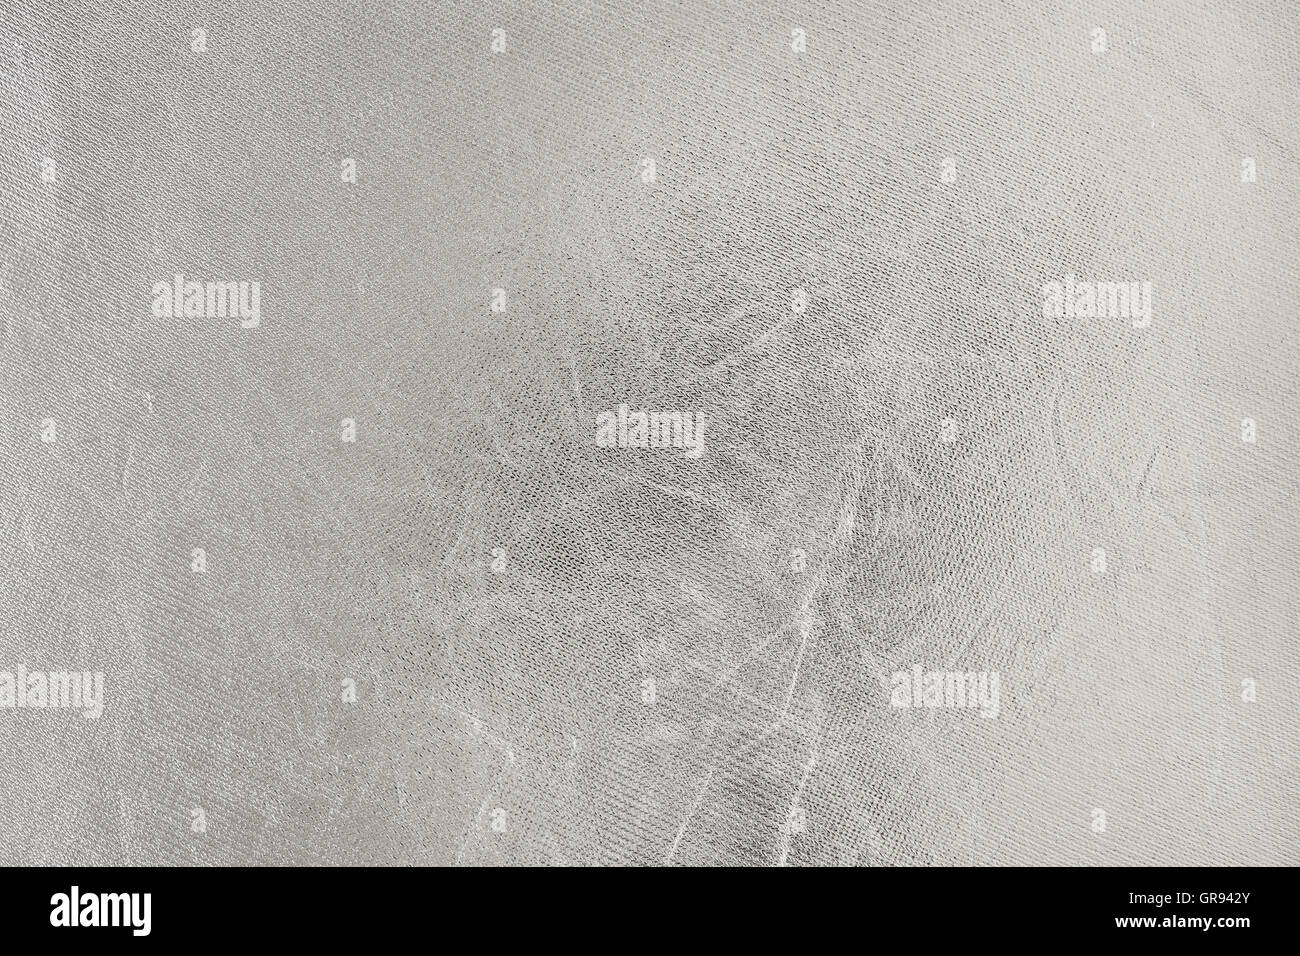 Silver metallic scratched background or texture. Stock Photo